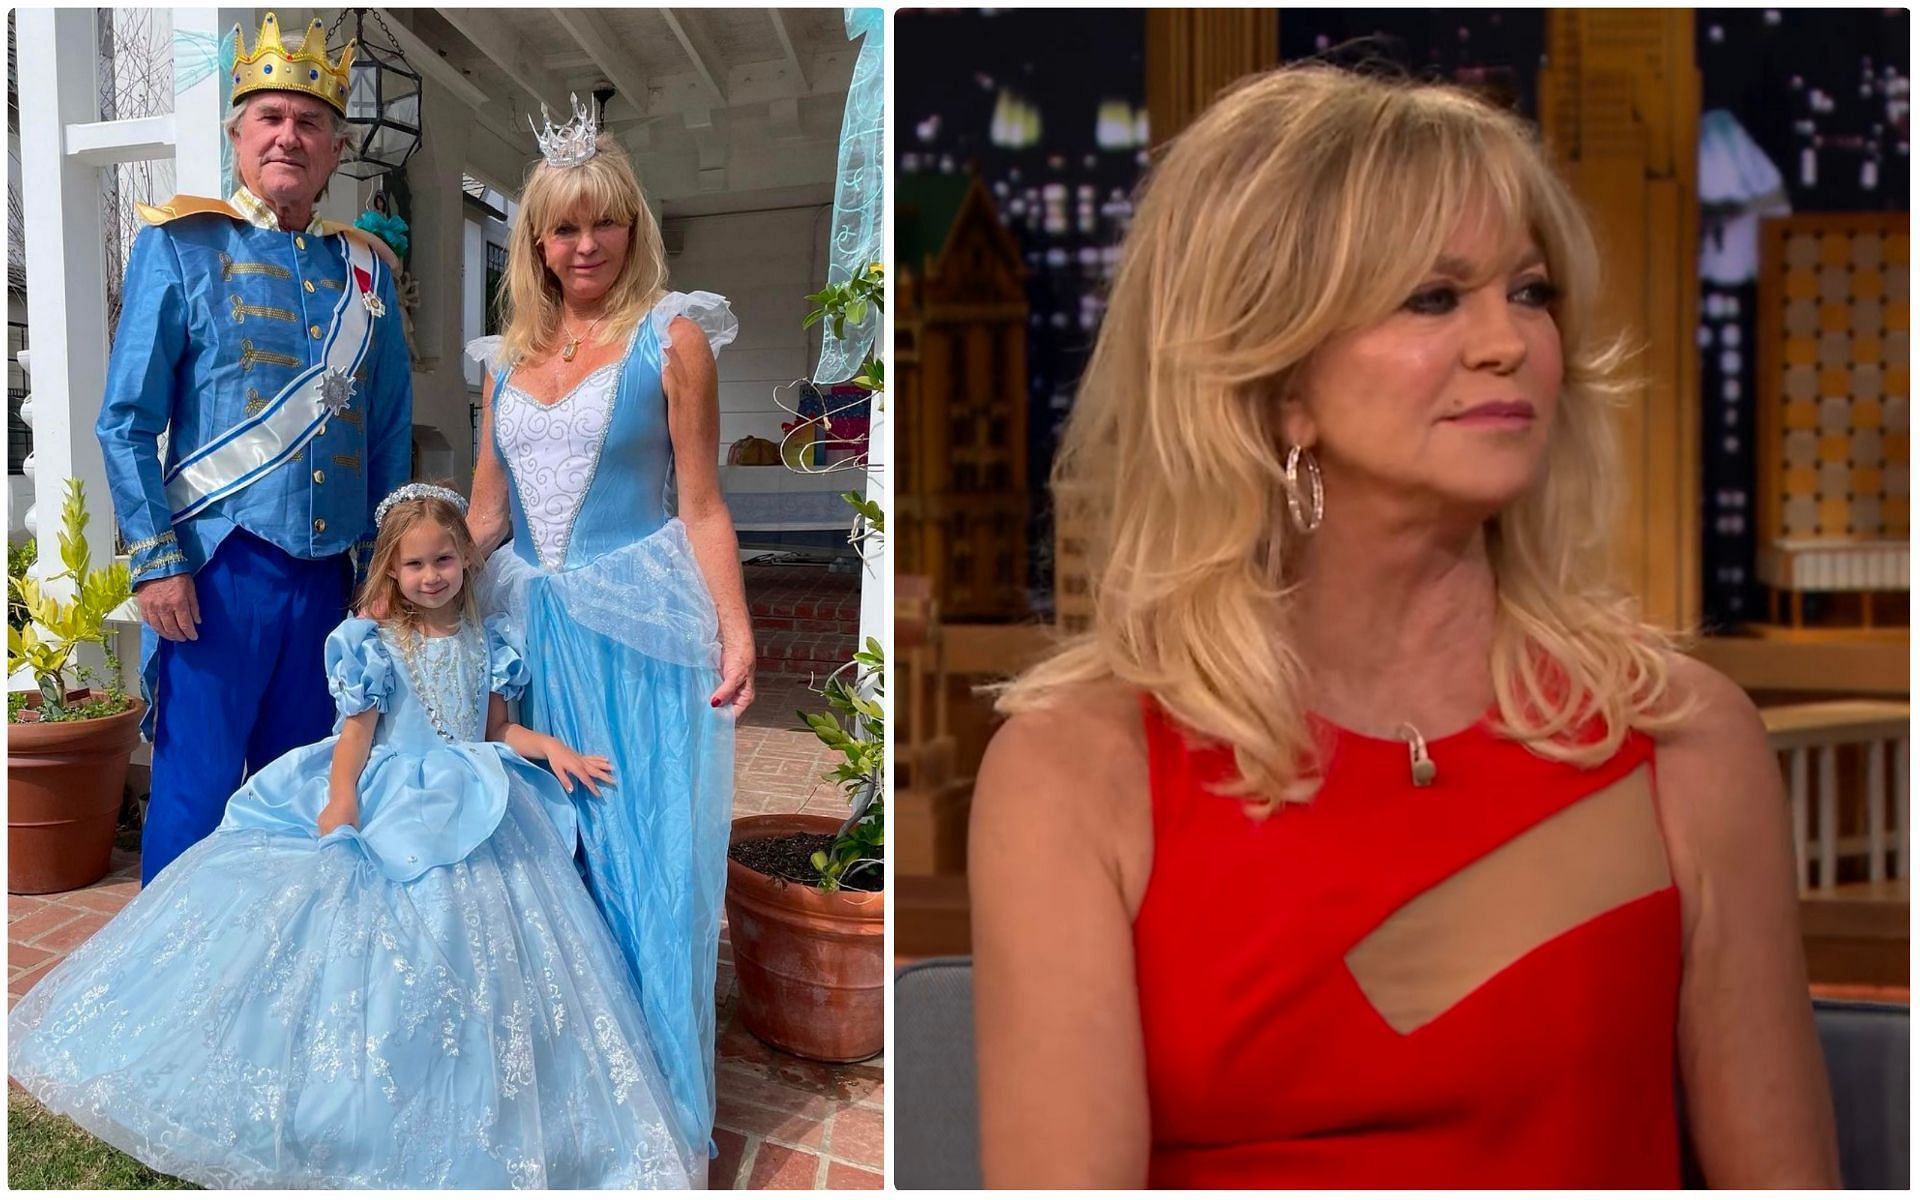 Goldie Hawn dressed up like Cindrella for her granddaughter